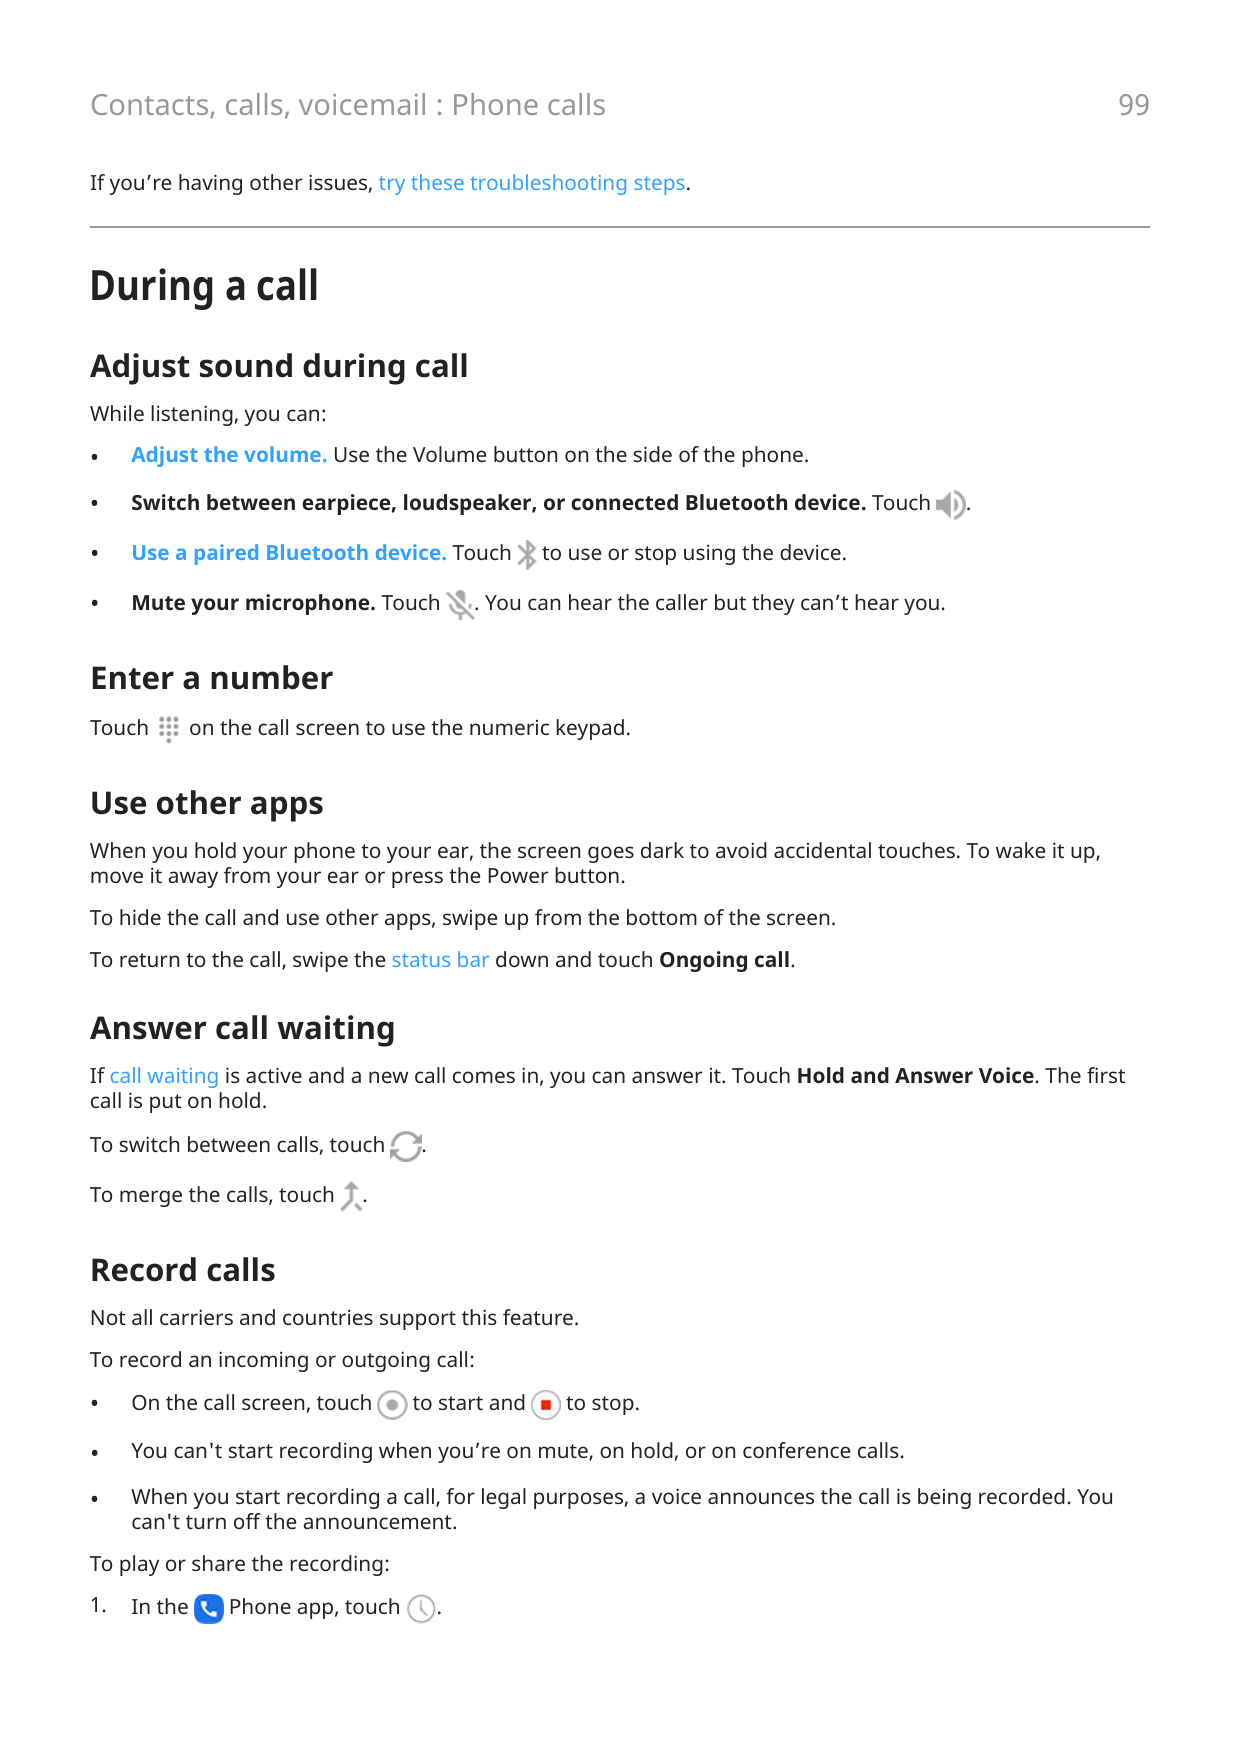 99Contacts, calls, voicemail : Phone callsIf you’re having other issues, try these troubleshooting steps.During a callAdjust sou